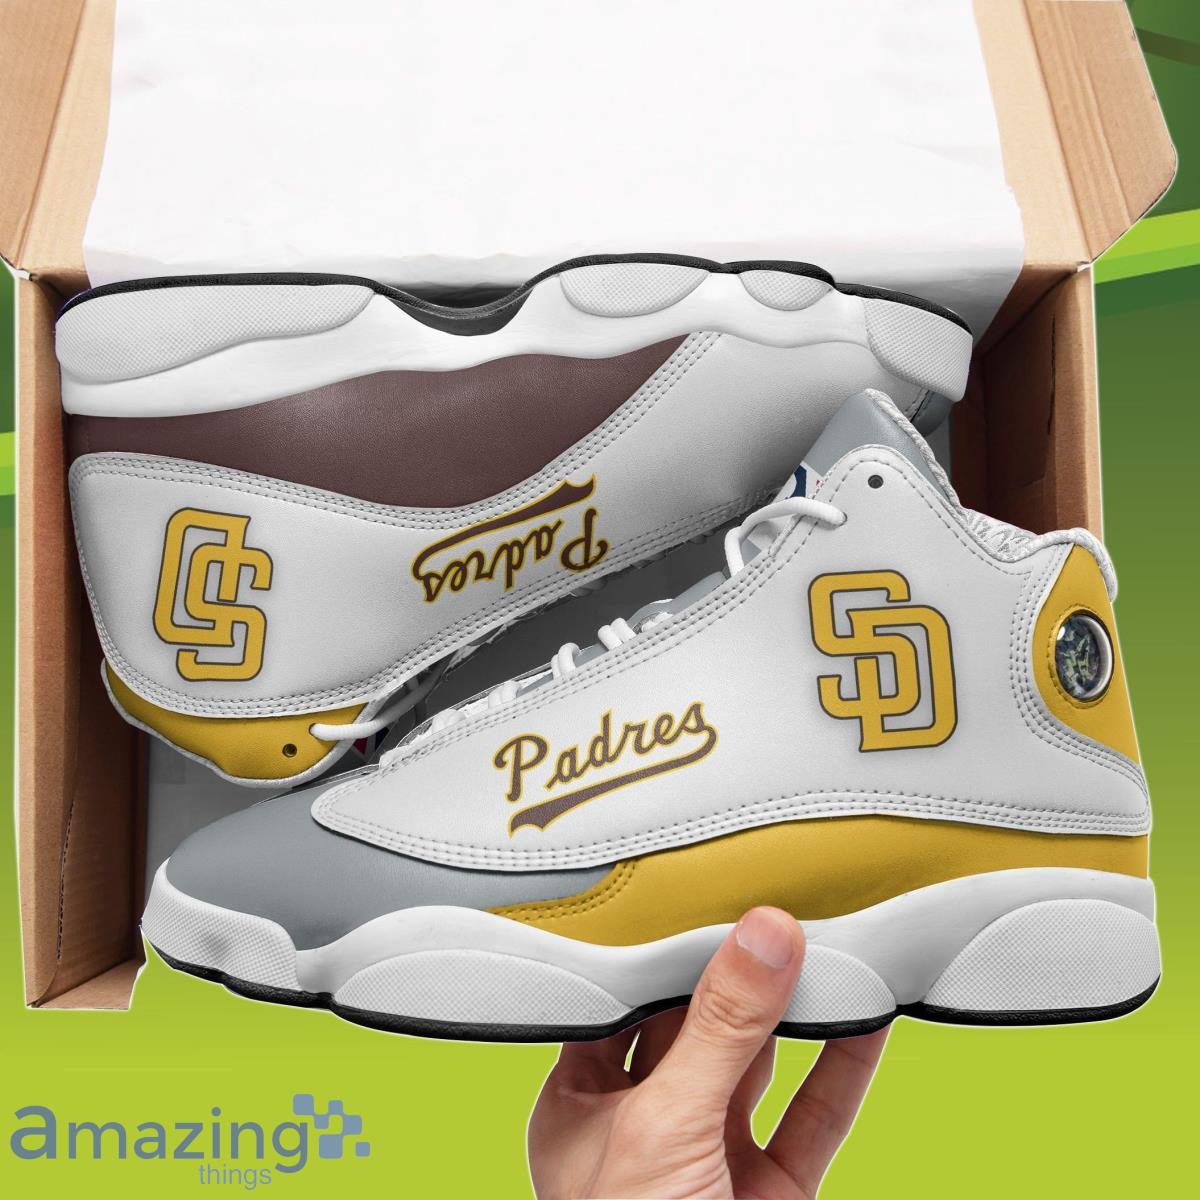 San Diego Padres Air Jordan 13 Sneakers Best Gift For Men And Women Product Photo 1